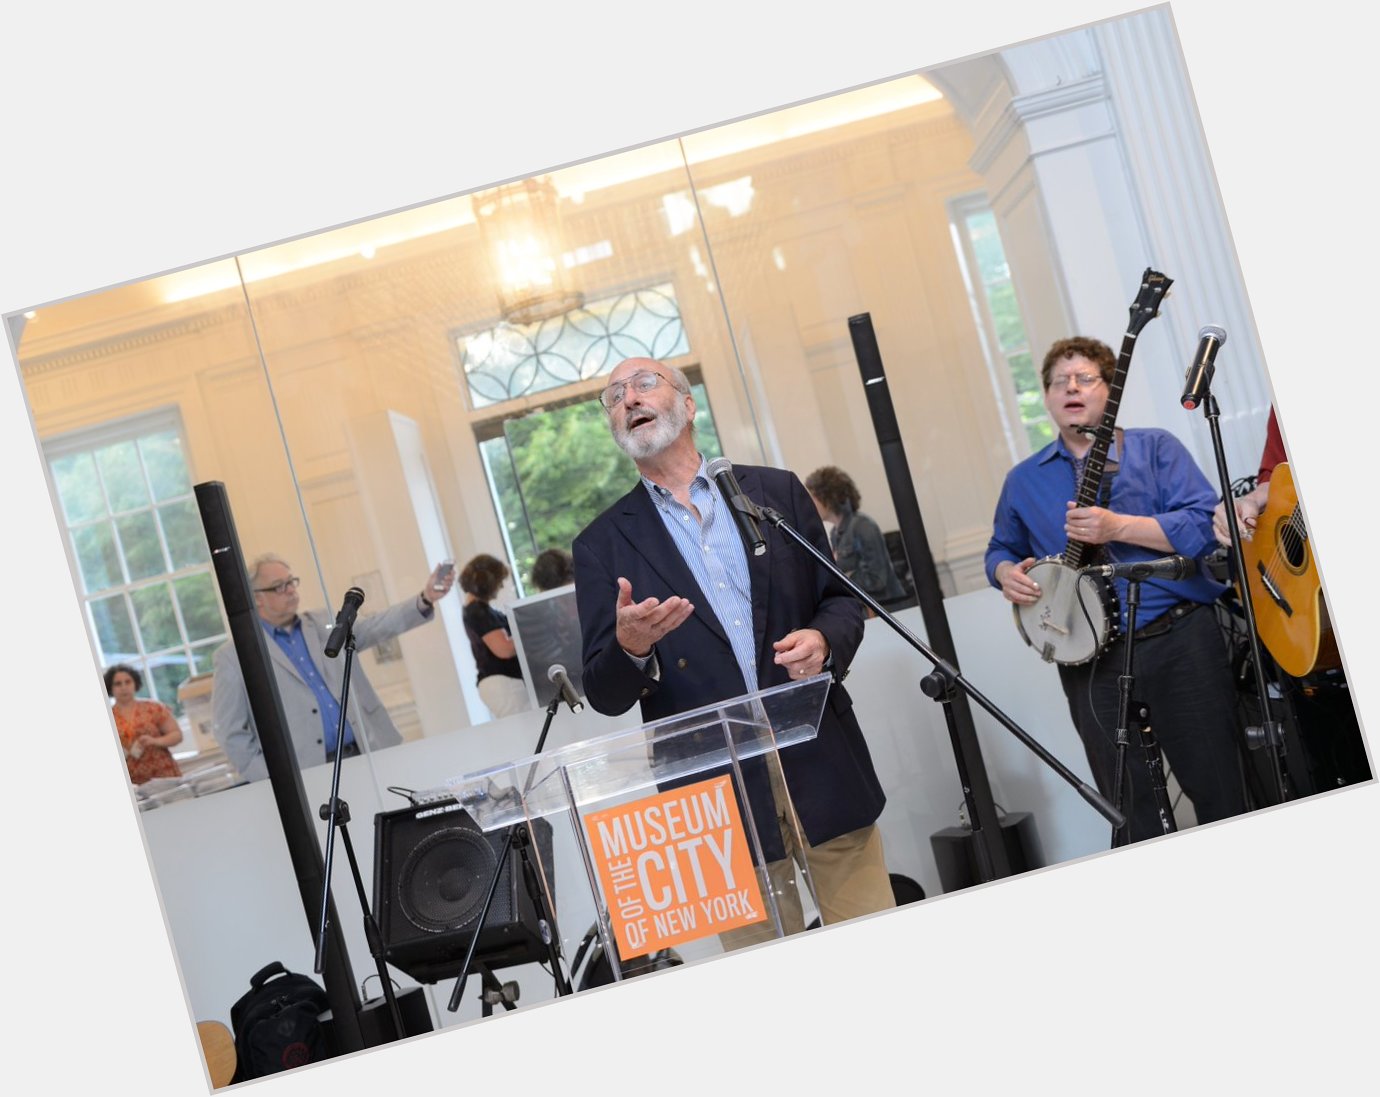 Happy Birthday to Noel Paul Stookey pictured here at an event tied to our exhibition (closing Jan 10). 